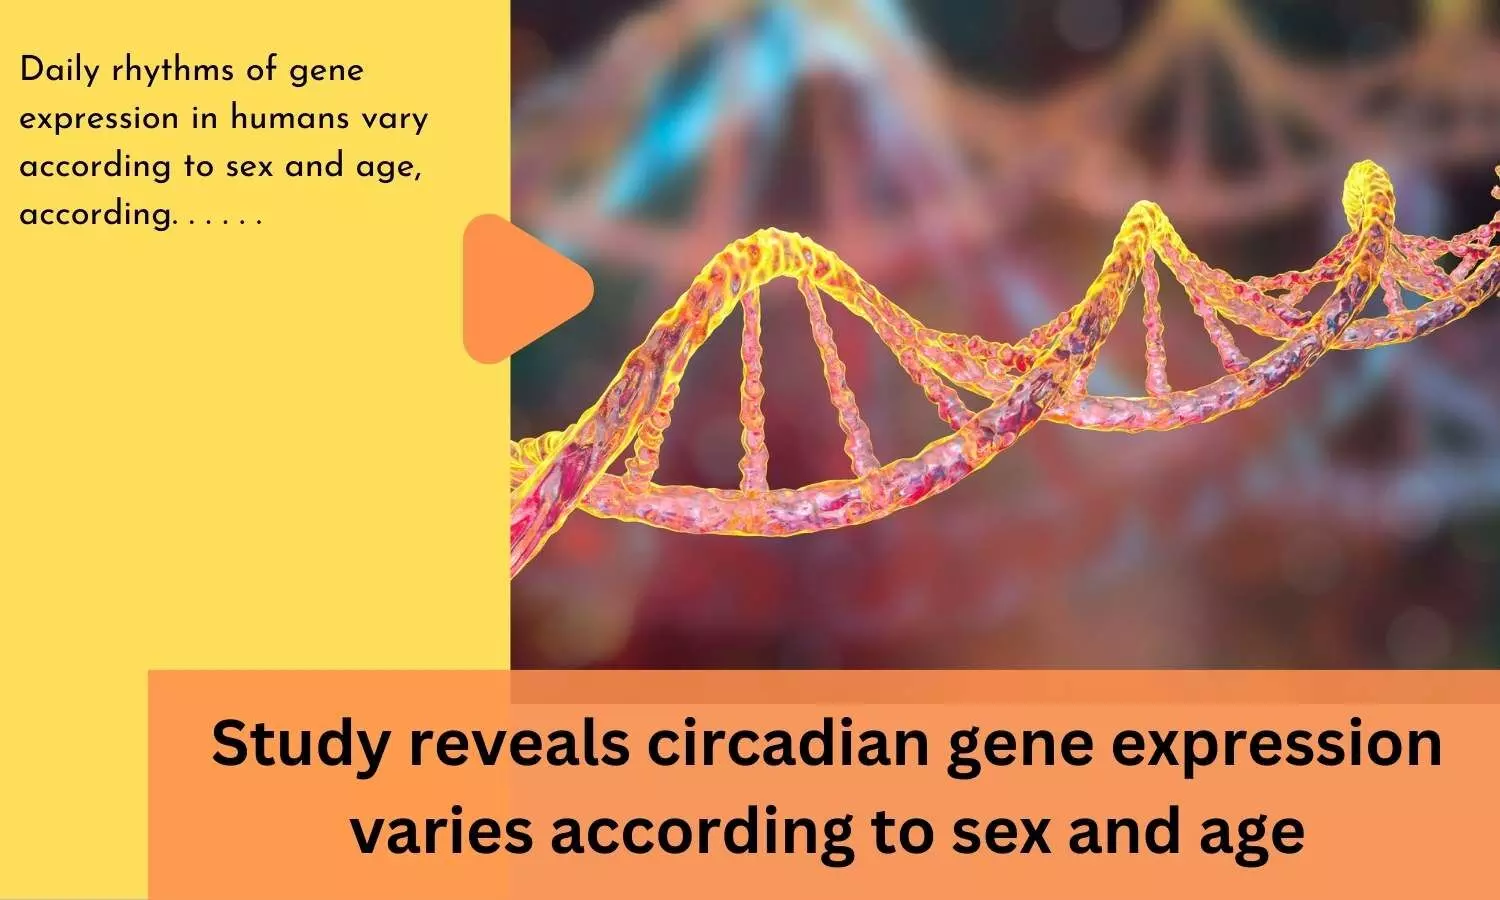 Study reveals circadian gene expression varies according to sex and age